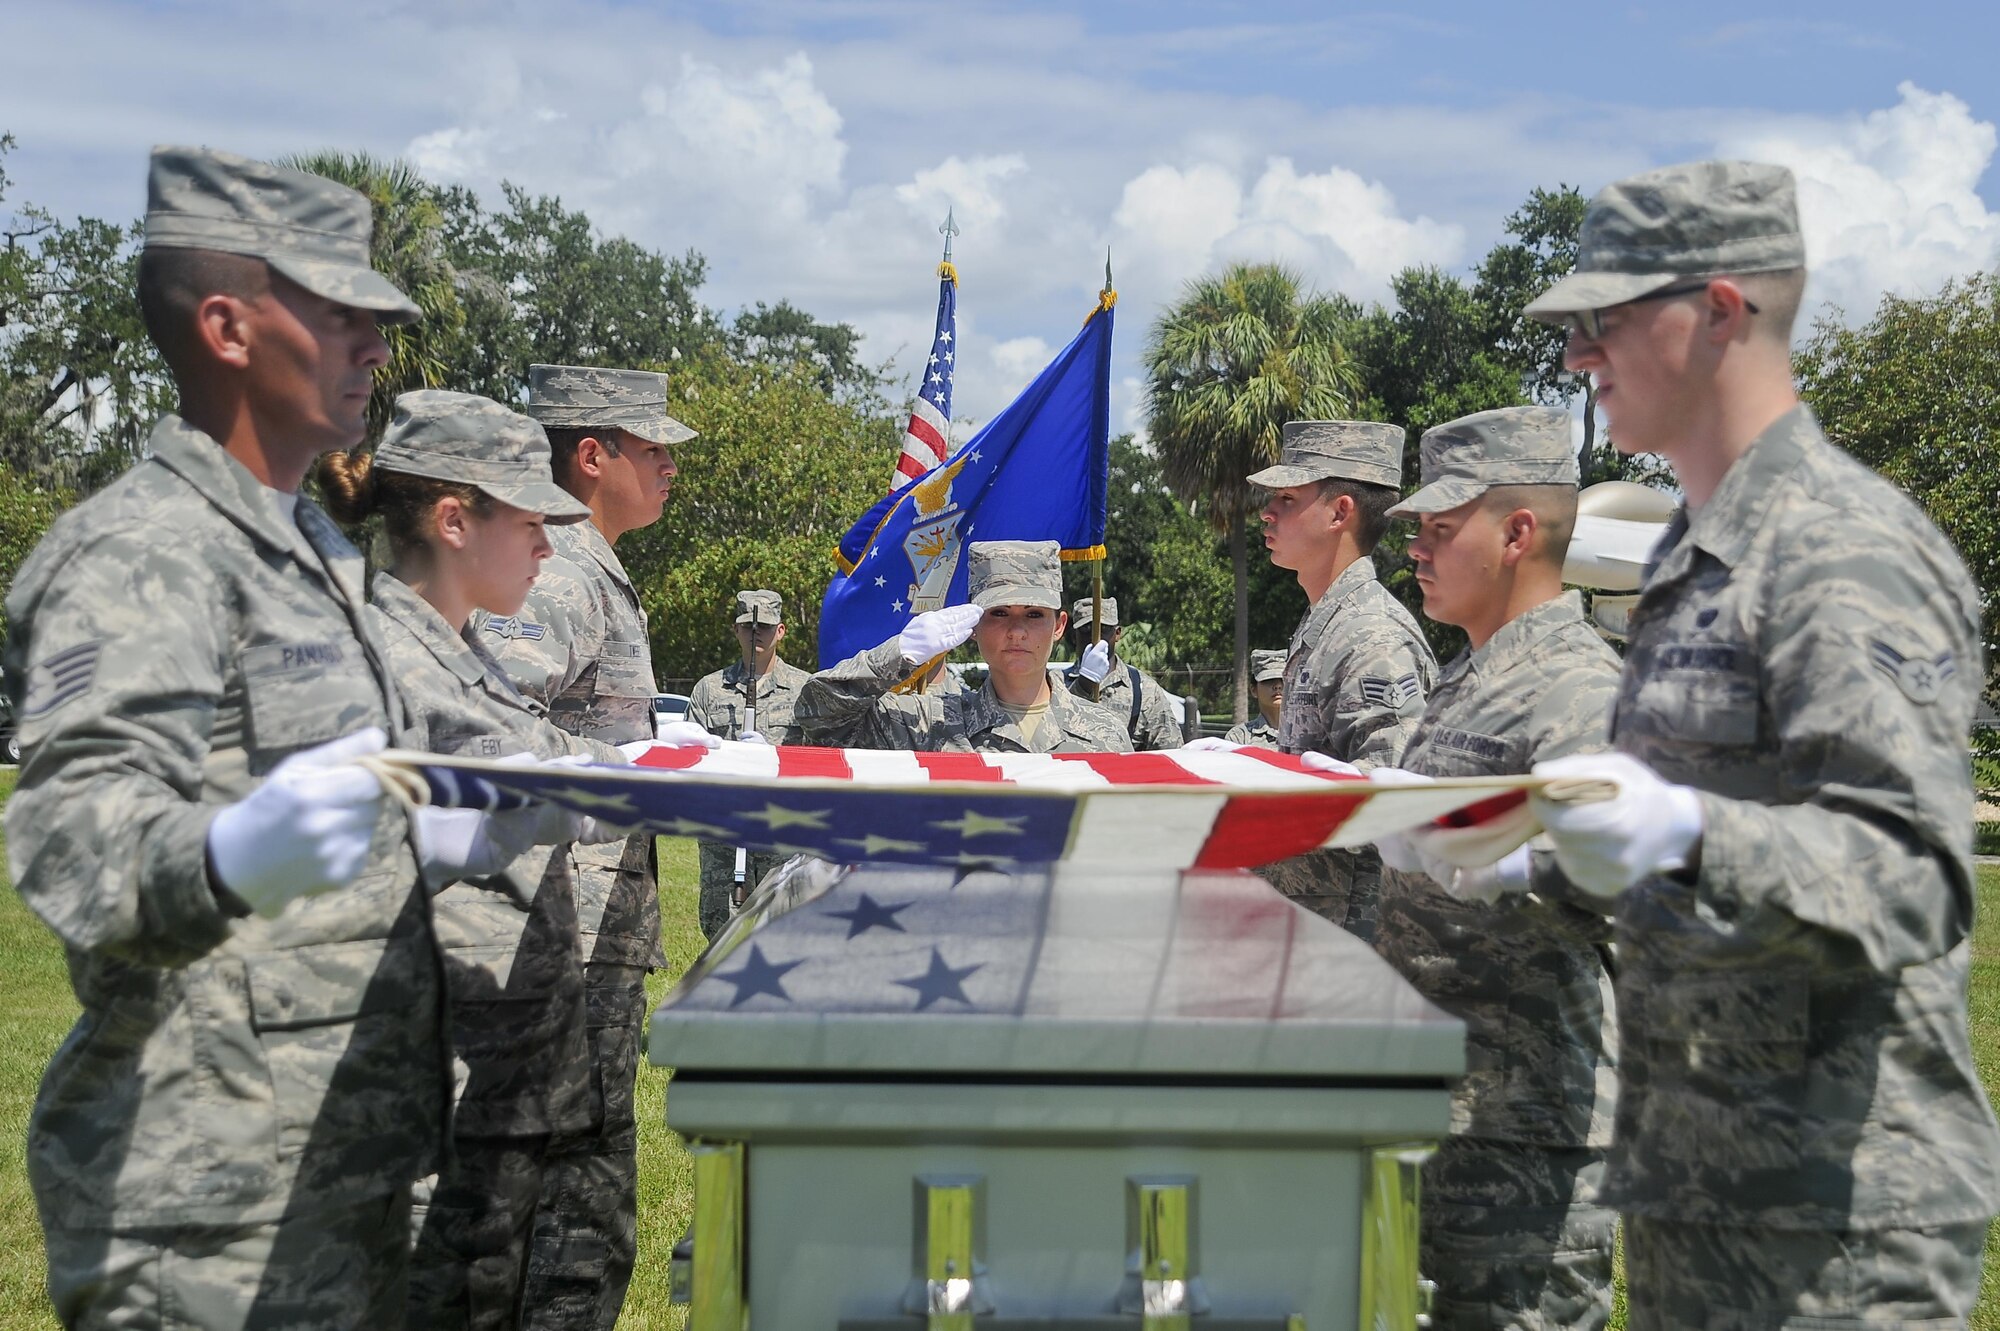 Base honor guardsmen practice pallbearer duties during an active-duty full-honors funeral demonstration at MacDill Air Force Base, Fla., Sept. 6, 2016. During the week and a half of training, the U.S. Air Force Honor Guard Mobile Training Team instructed base honor guardsmen from MacDill and surrounding areas on various duties to include flag folding, presentation of the colors, firing party and pallbearing. (U.S. Air Force photo by Airman 1st Class Mariette Adams)